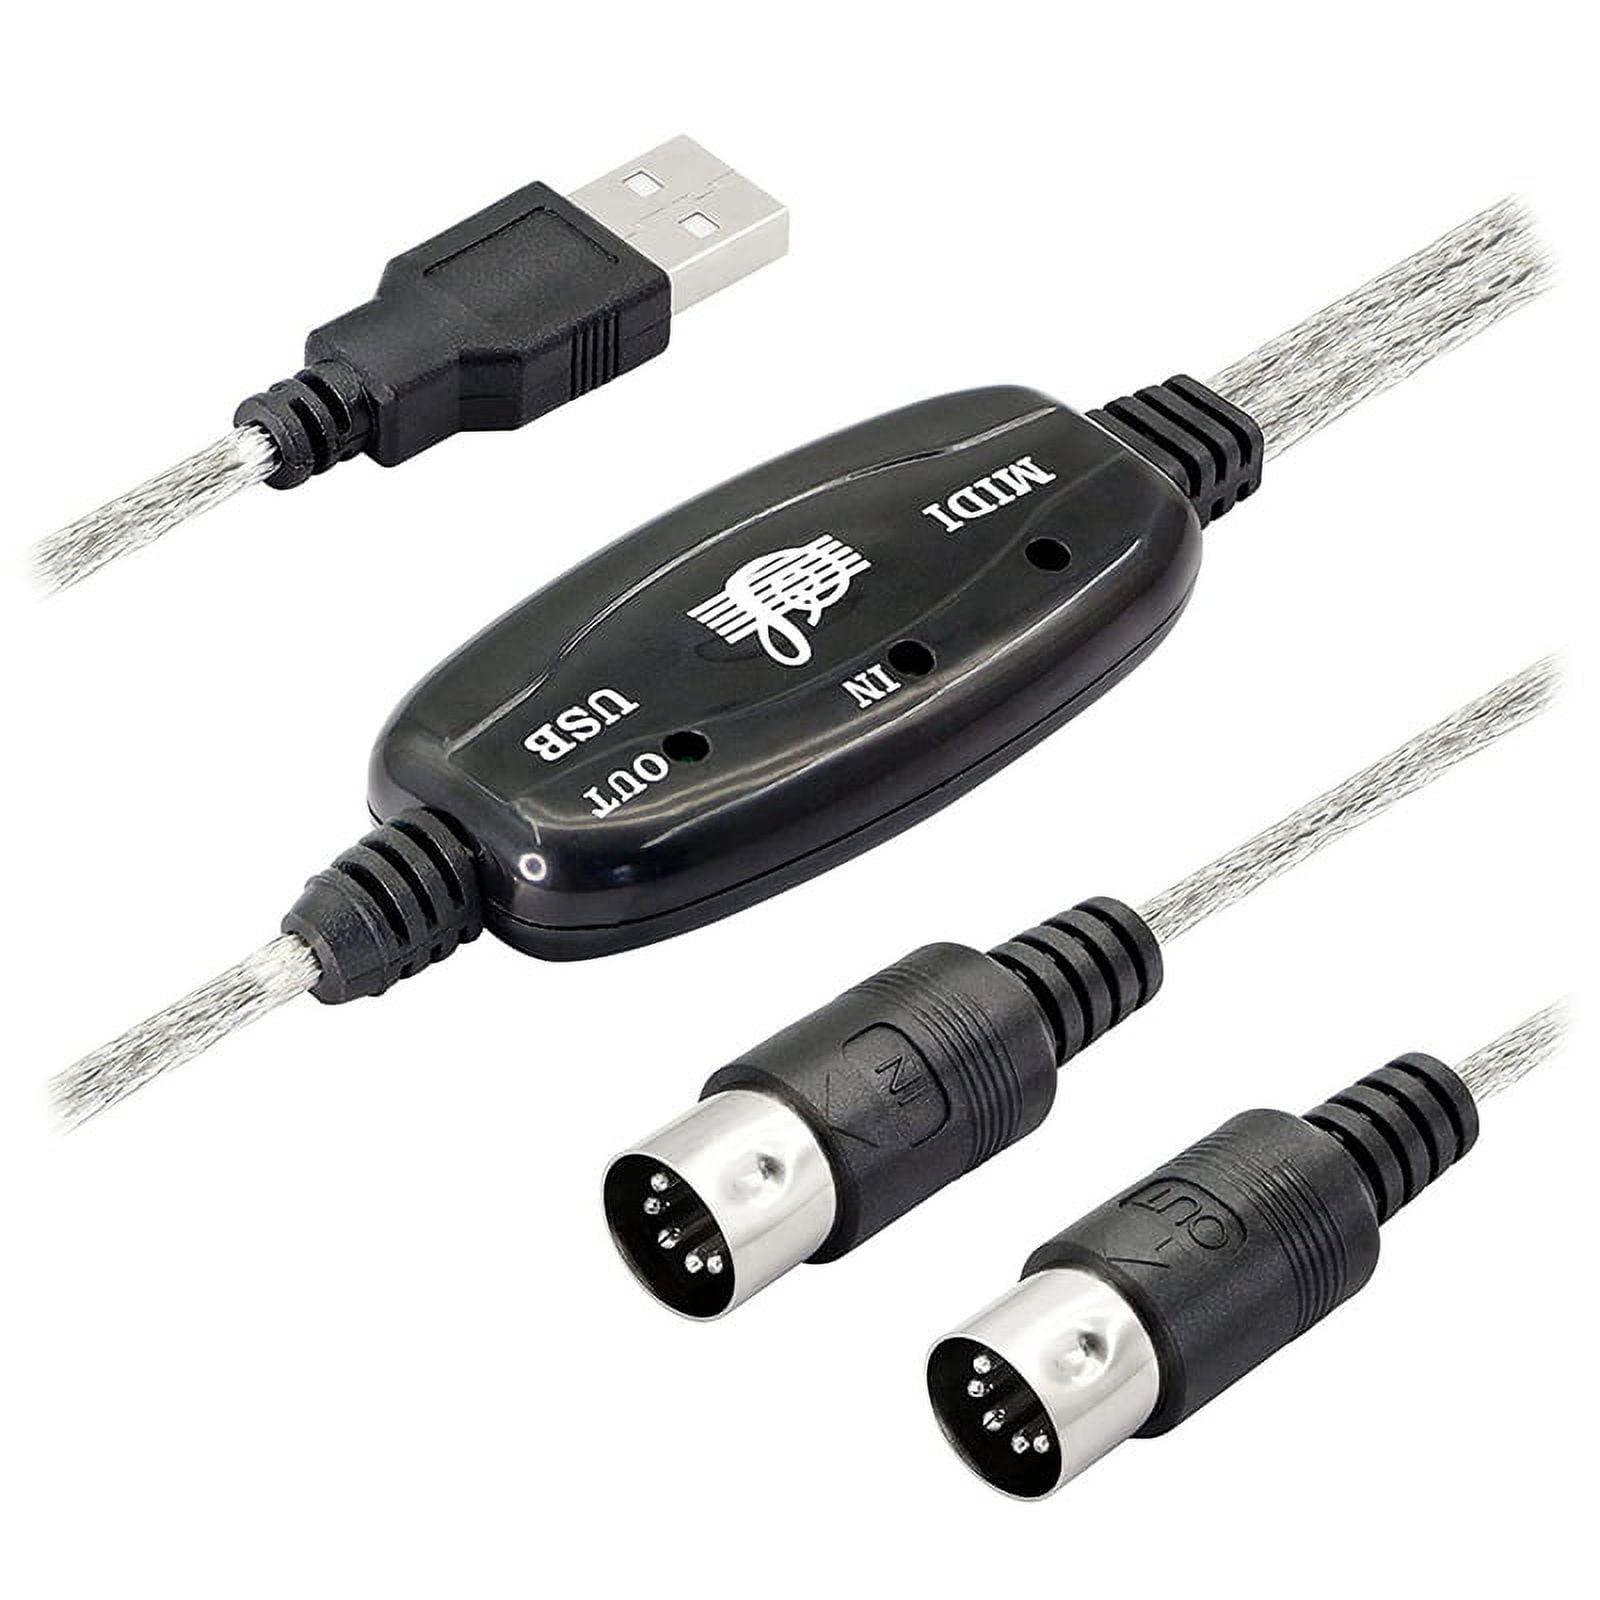 USB MIDI Cable Adapter, USB Type A Male to MIDI Din 5 Pin In-Out Cable  Interface with LED Indicator for Music Keyboard